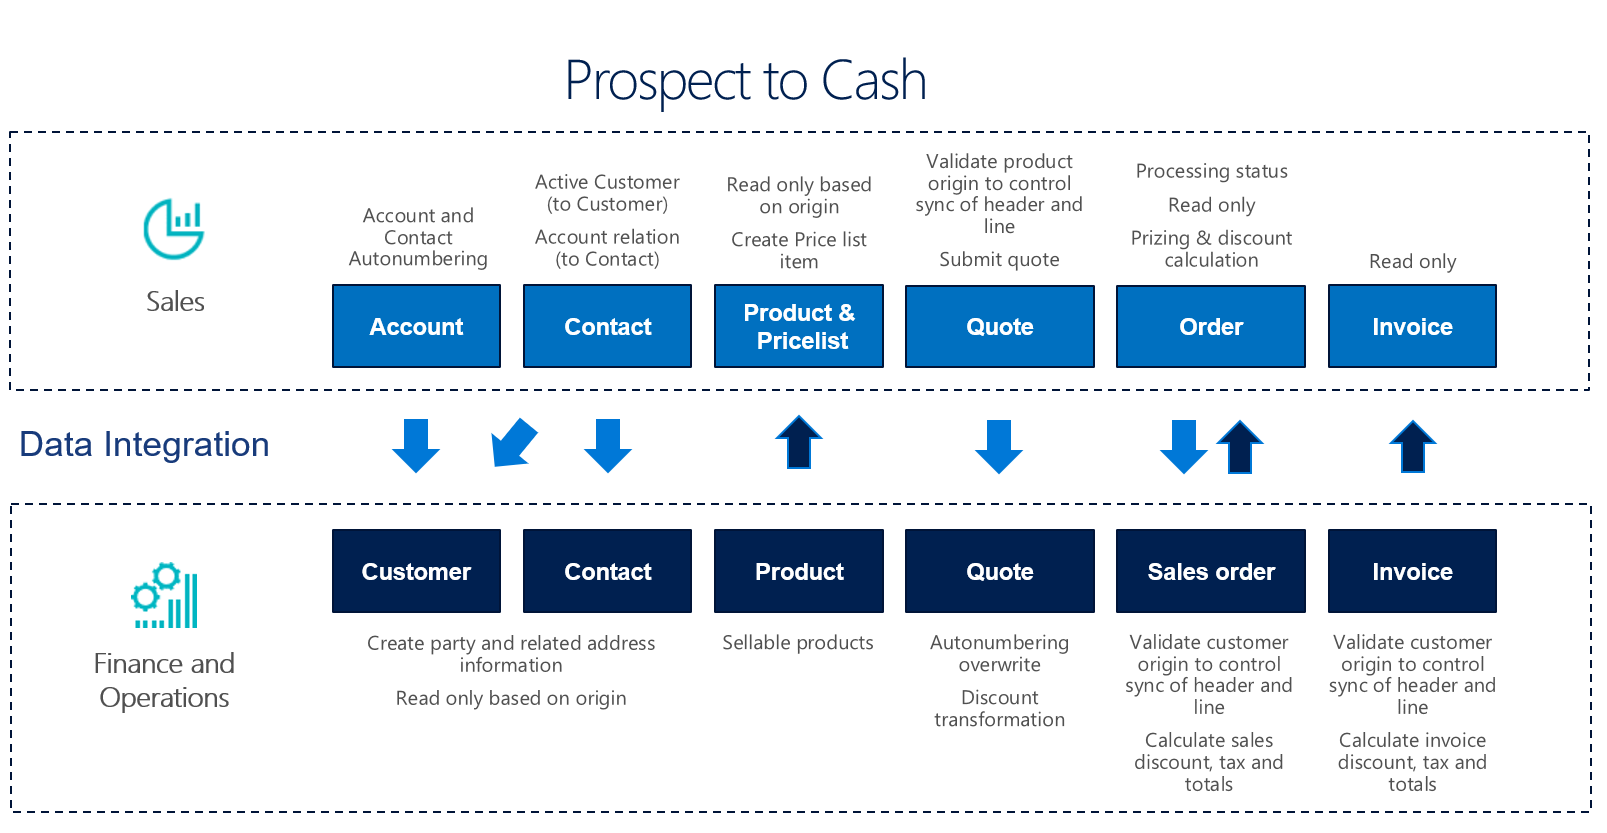 A graphic showing the Prospect-to-cash data flow